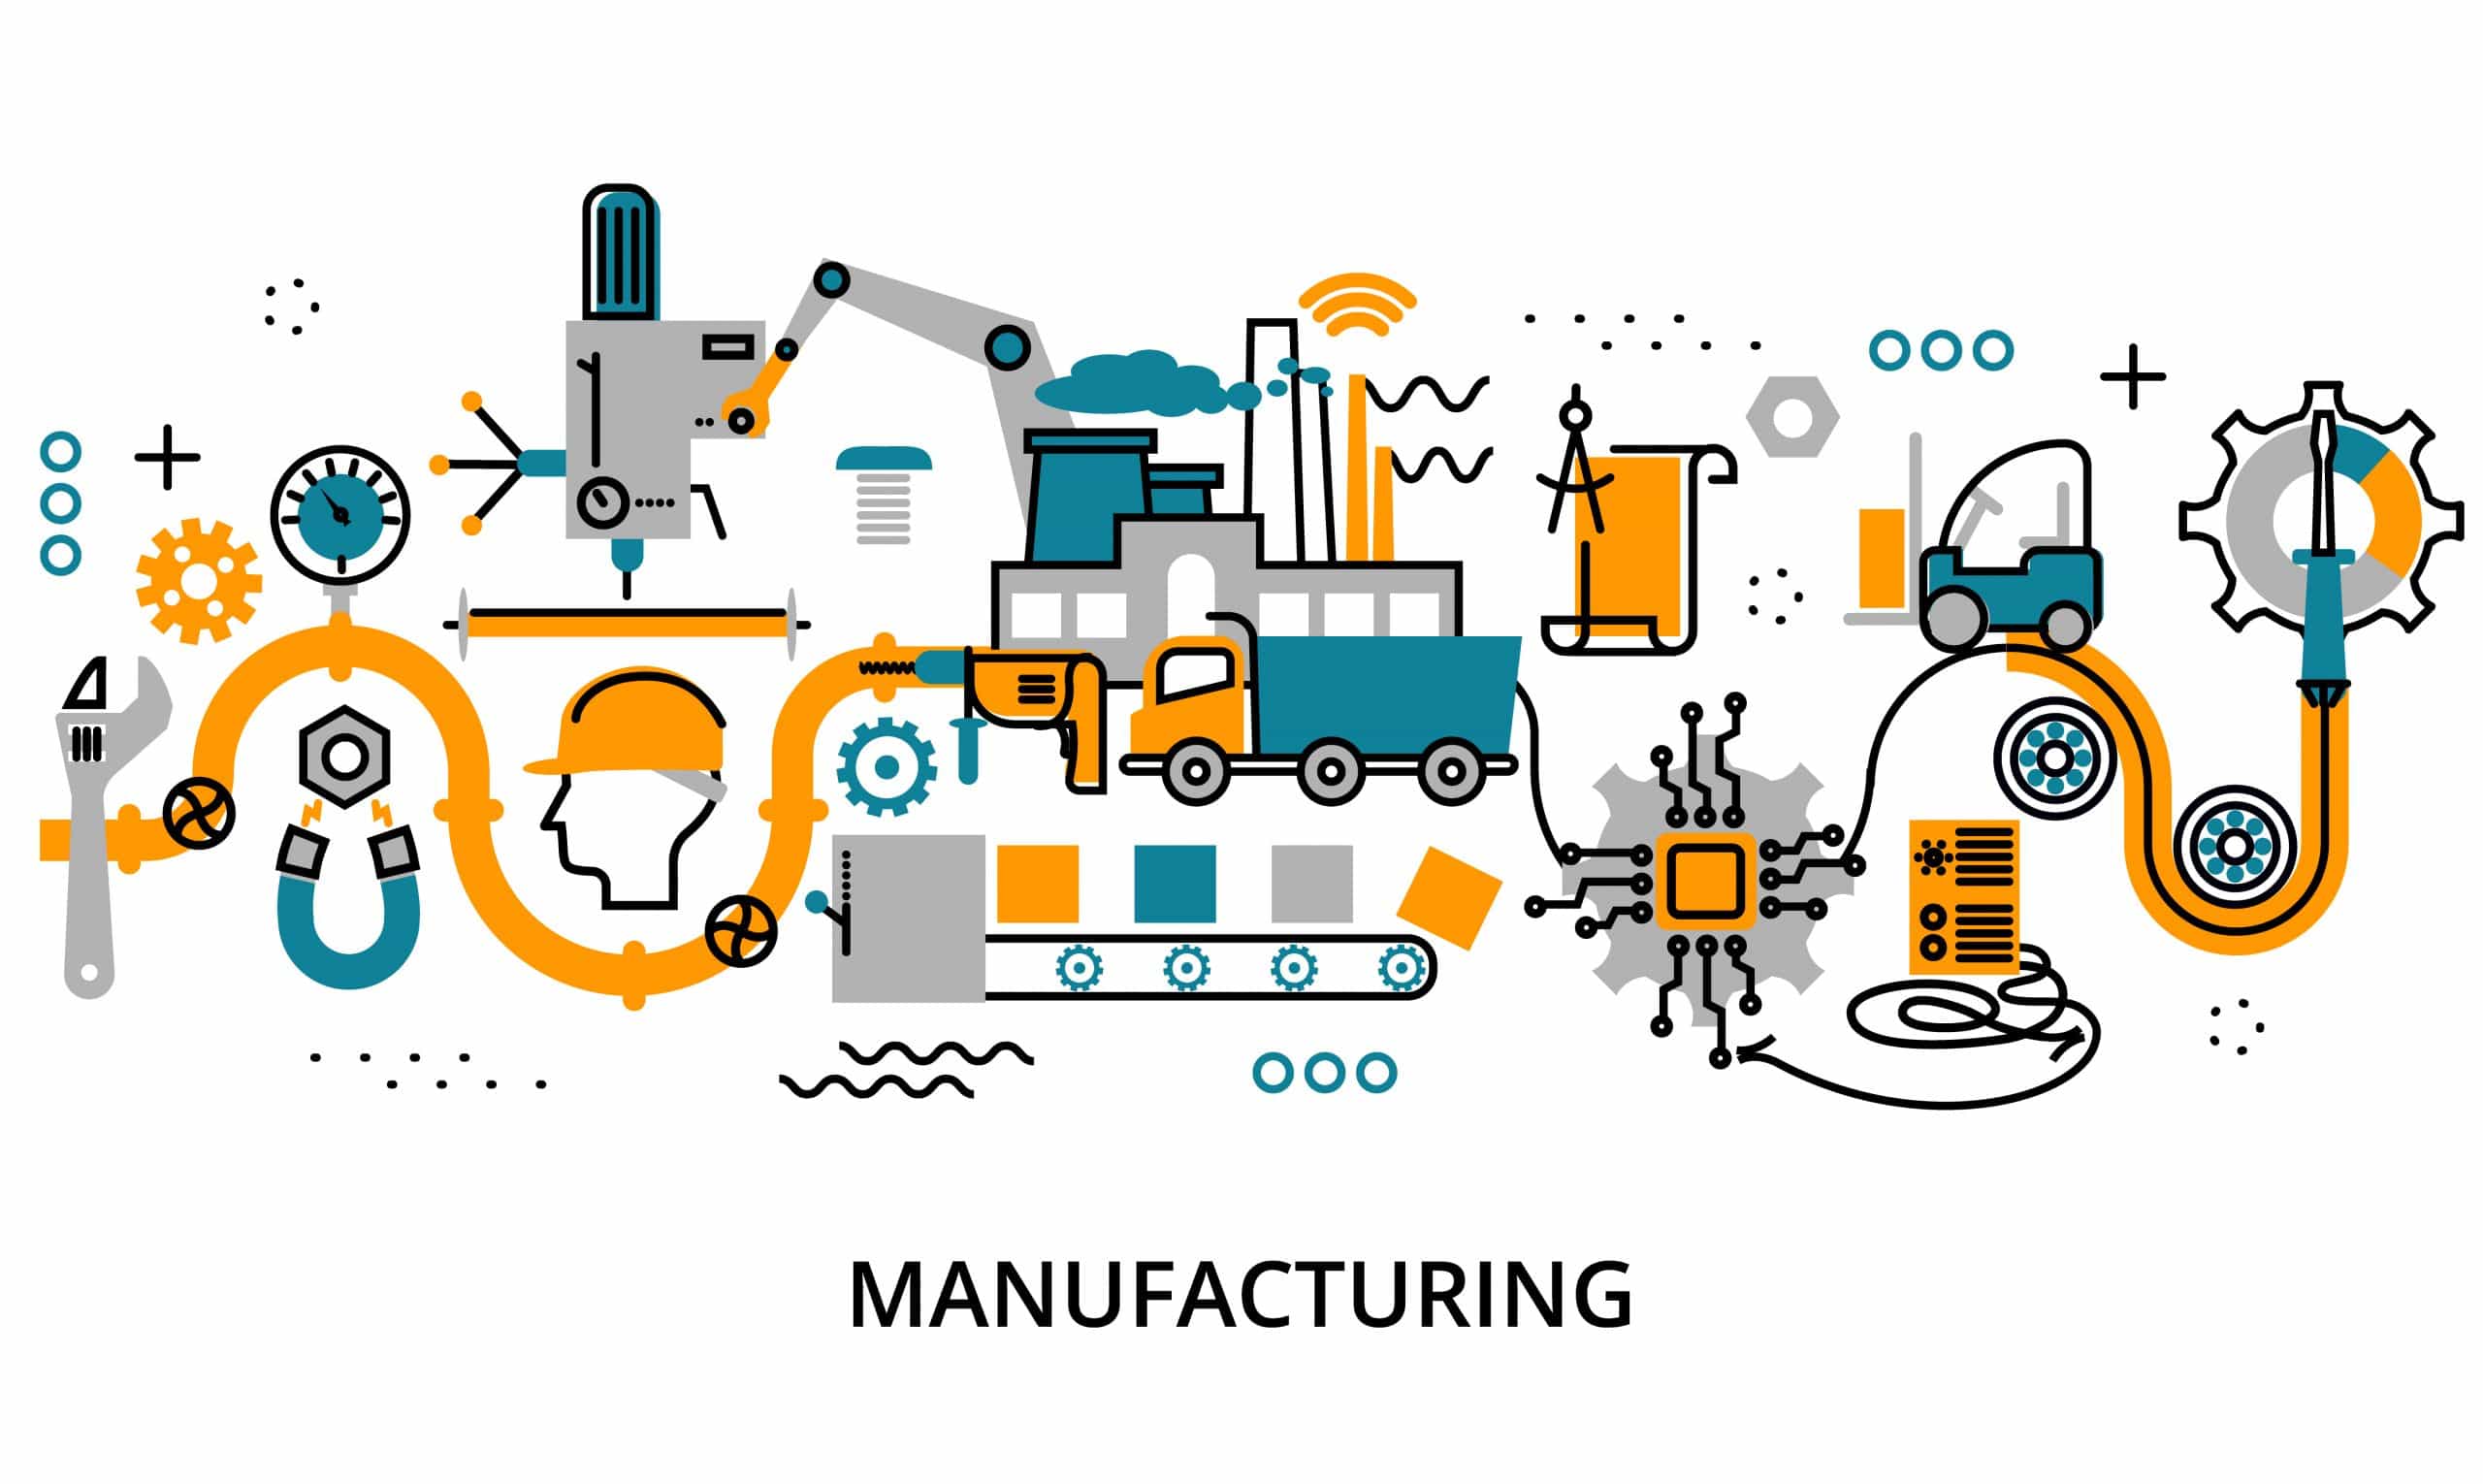 Solutions for the Process Manufacturing industry